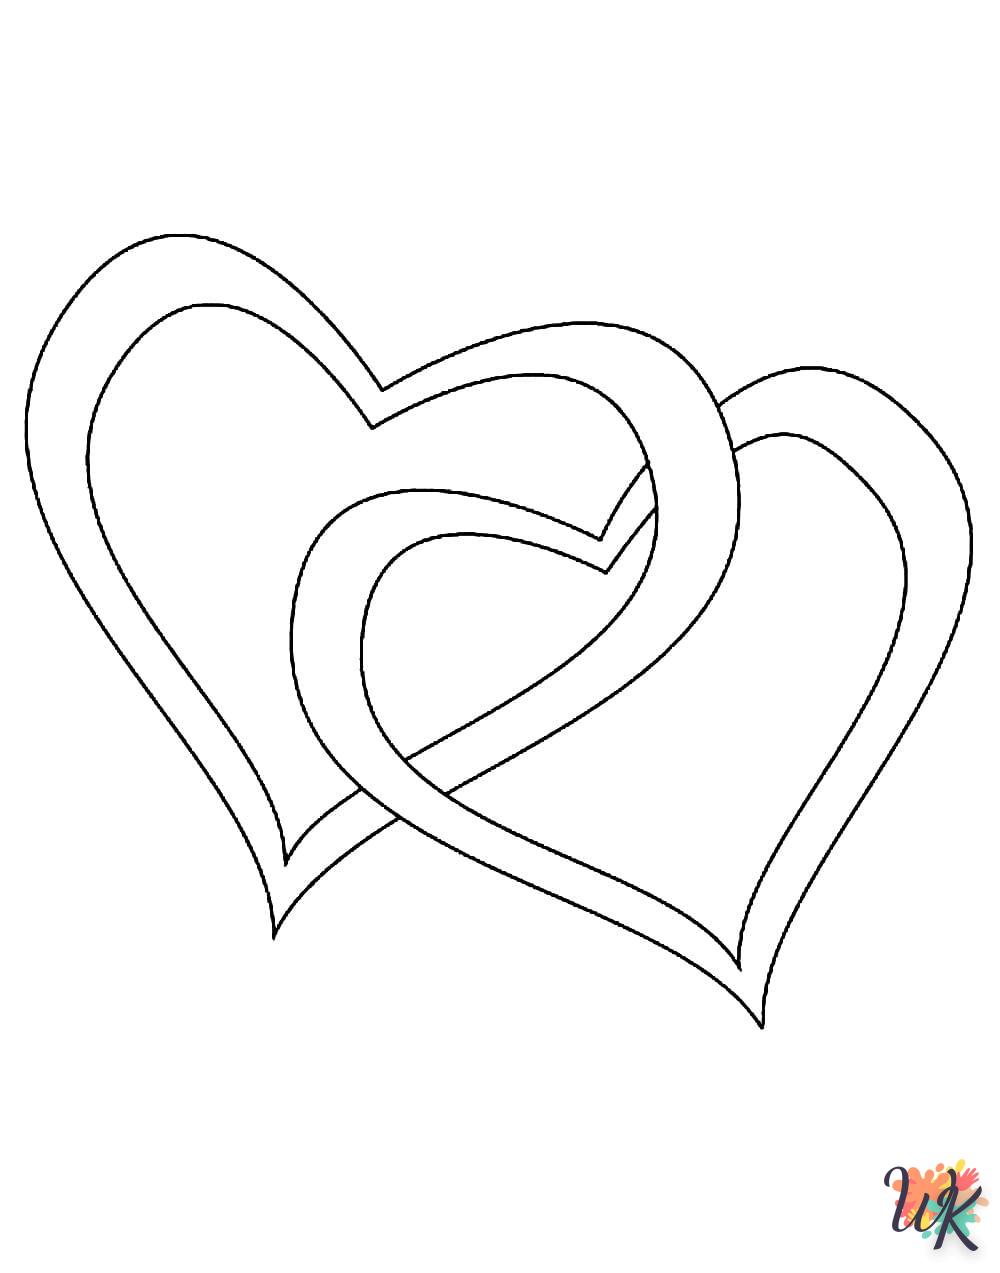 Heart coloring and cutting to print free 2